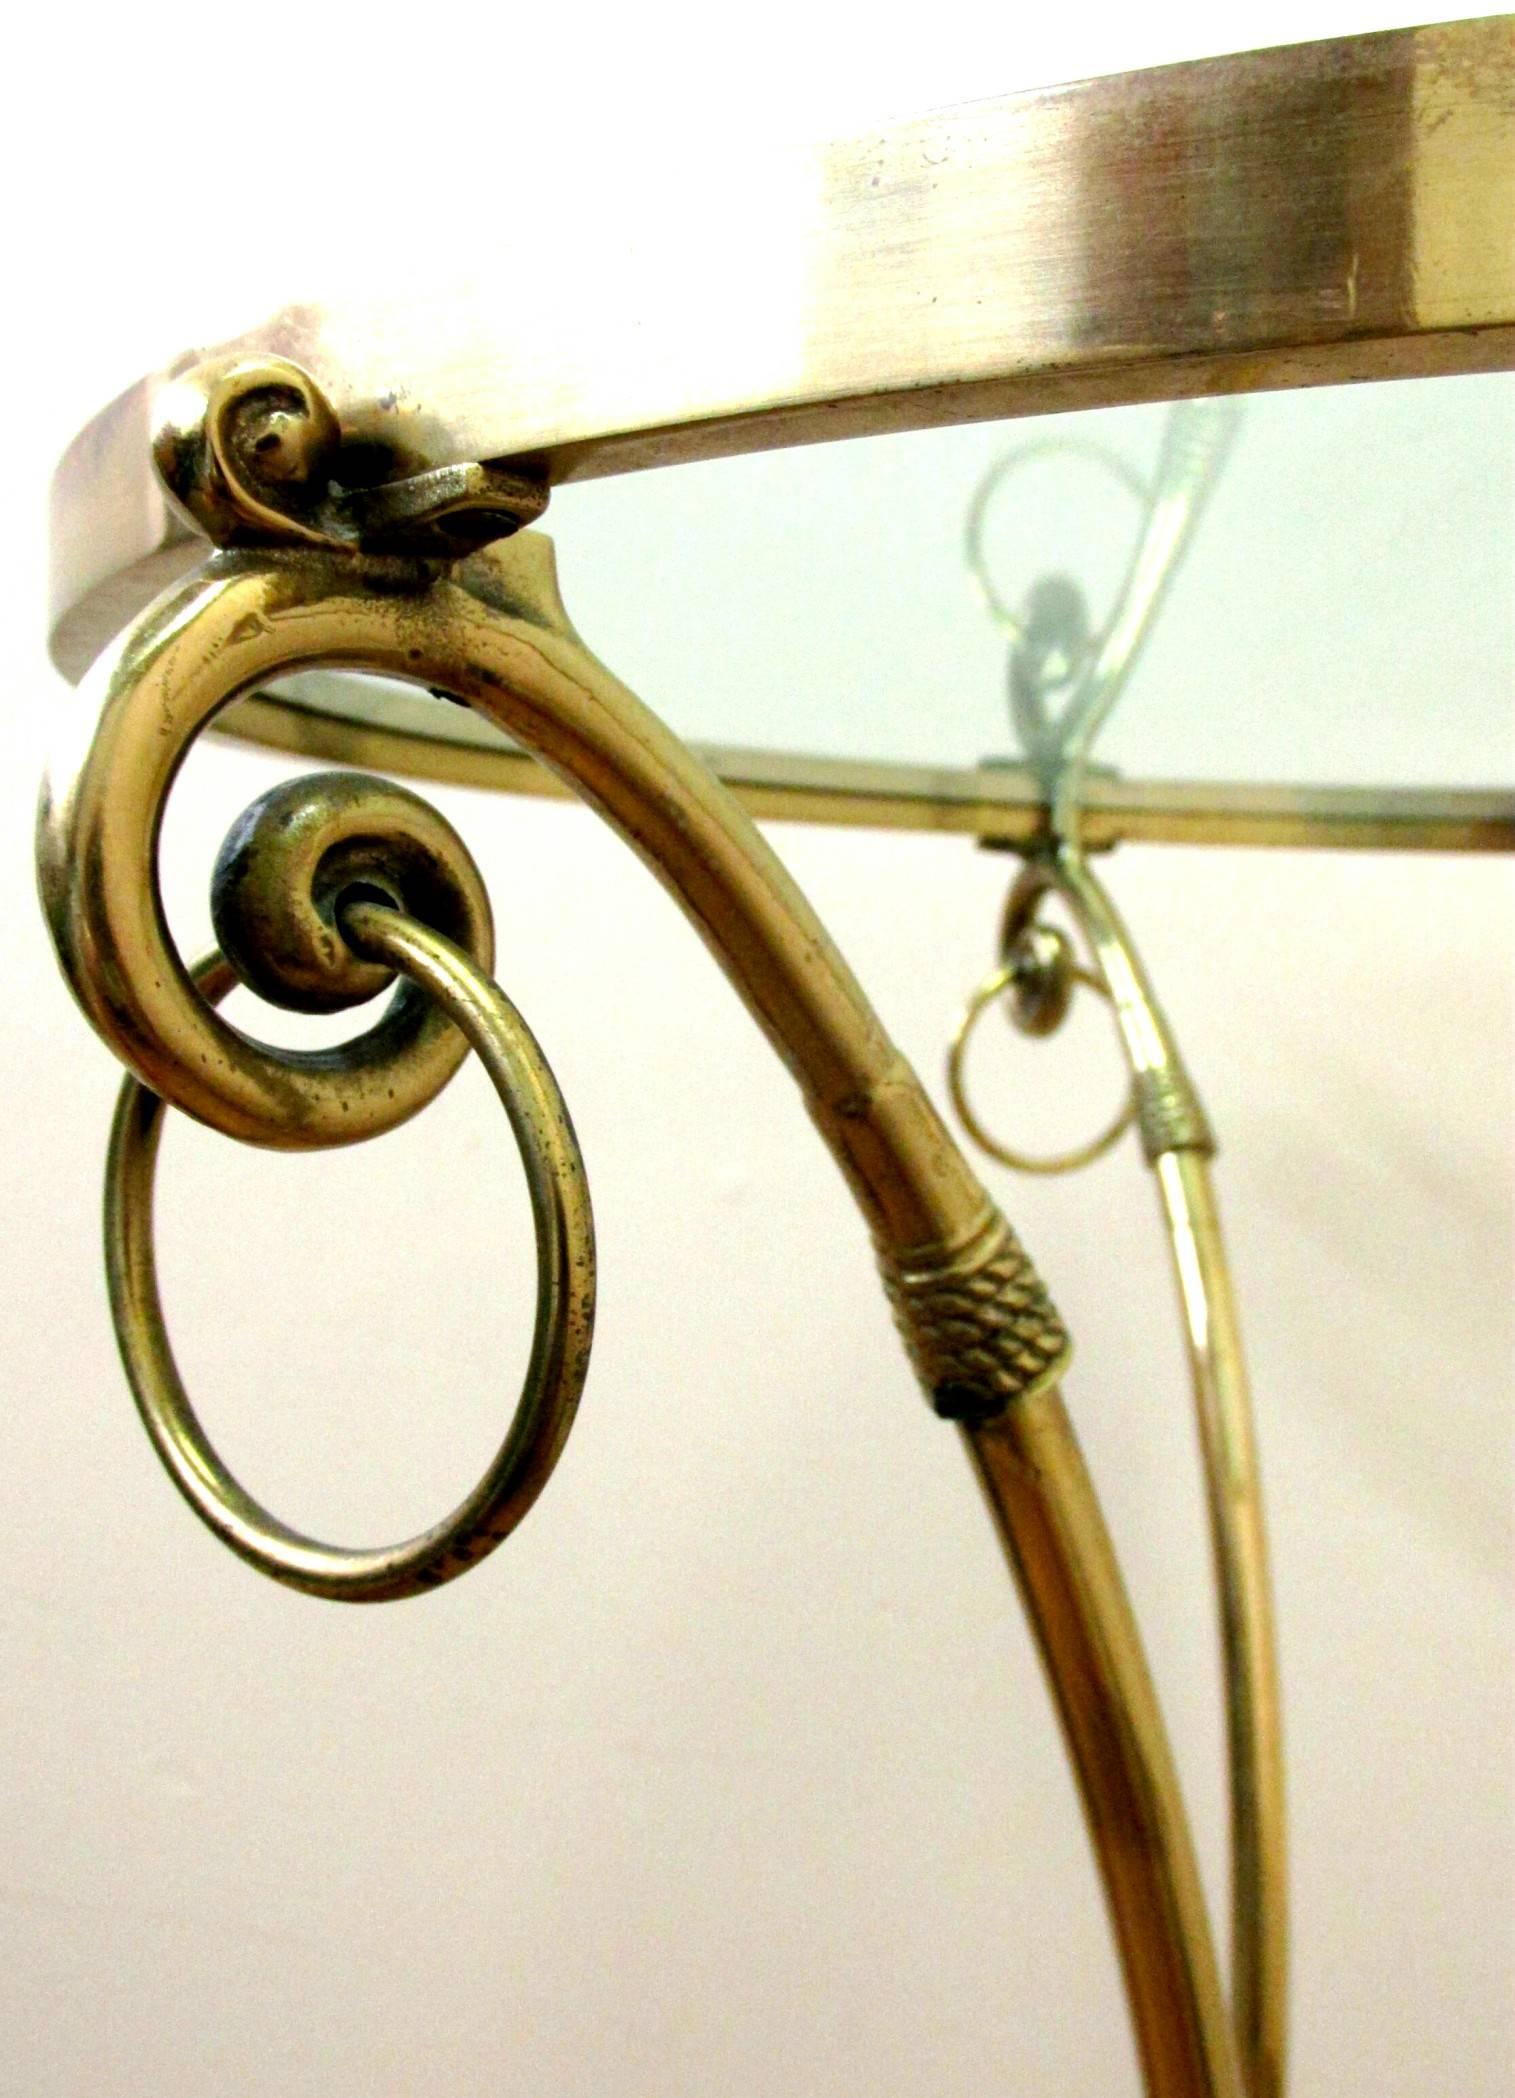 The brass frame showing three slender supports rising from hoof feet, braced by a circular stretcher surmounted by a circular glass top, the brass frieze decorated with three scrolled capitals with ringed elements.

International clients are tax